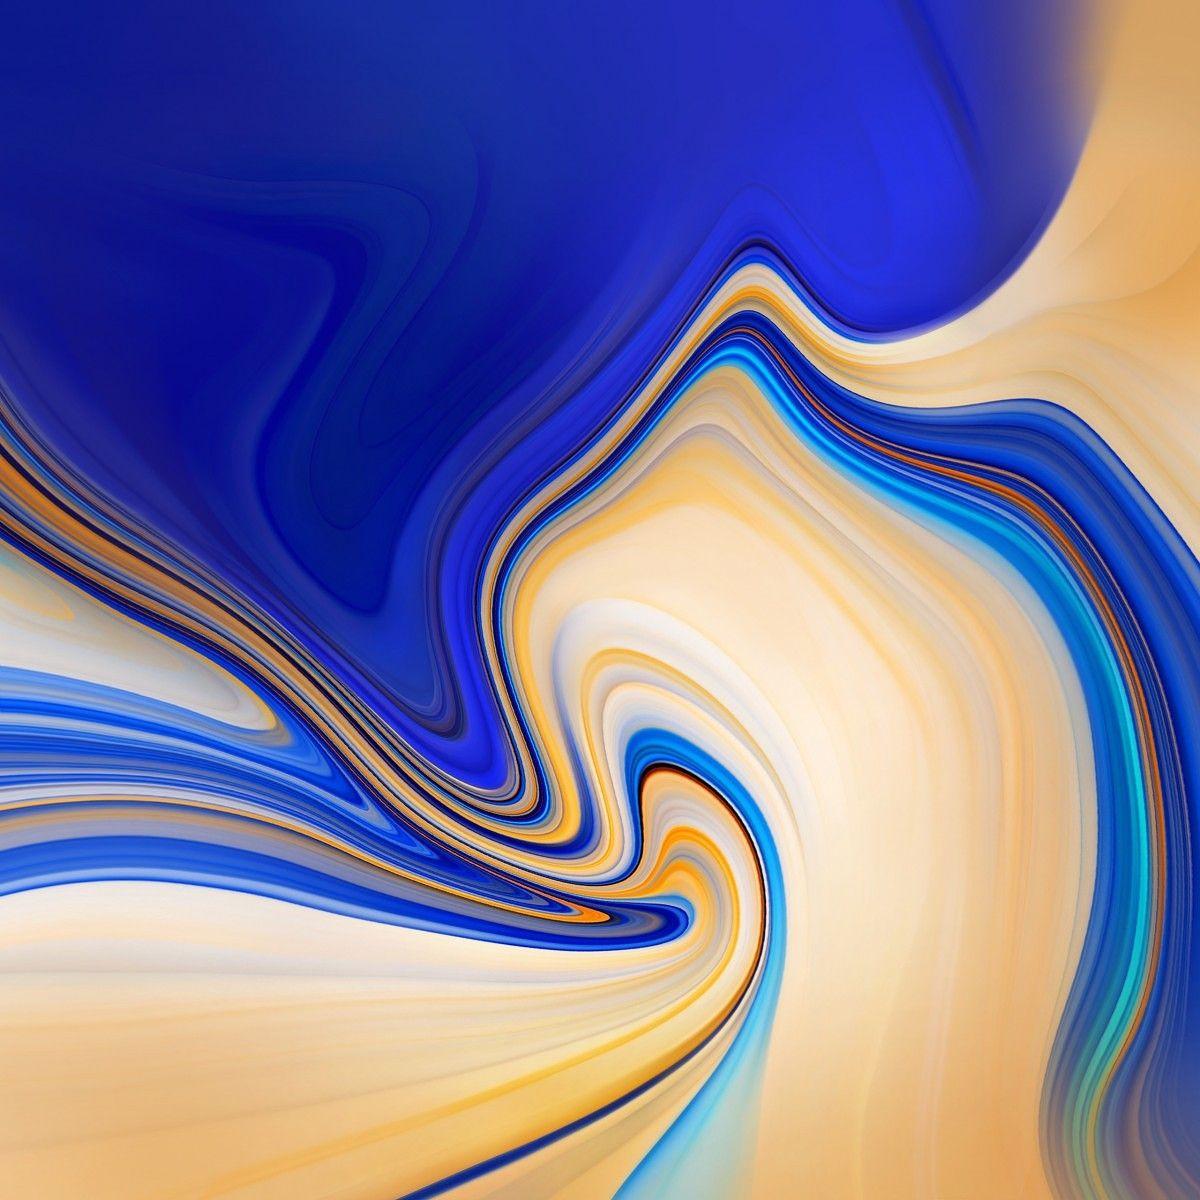 Samsung Galaxy Note 9 Wallpapers - Wallpaper Cave